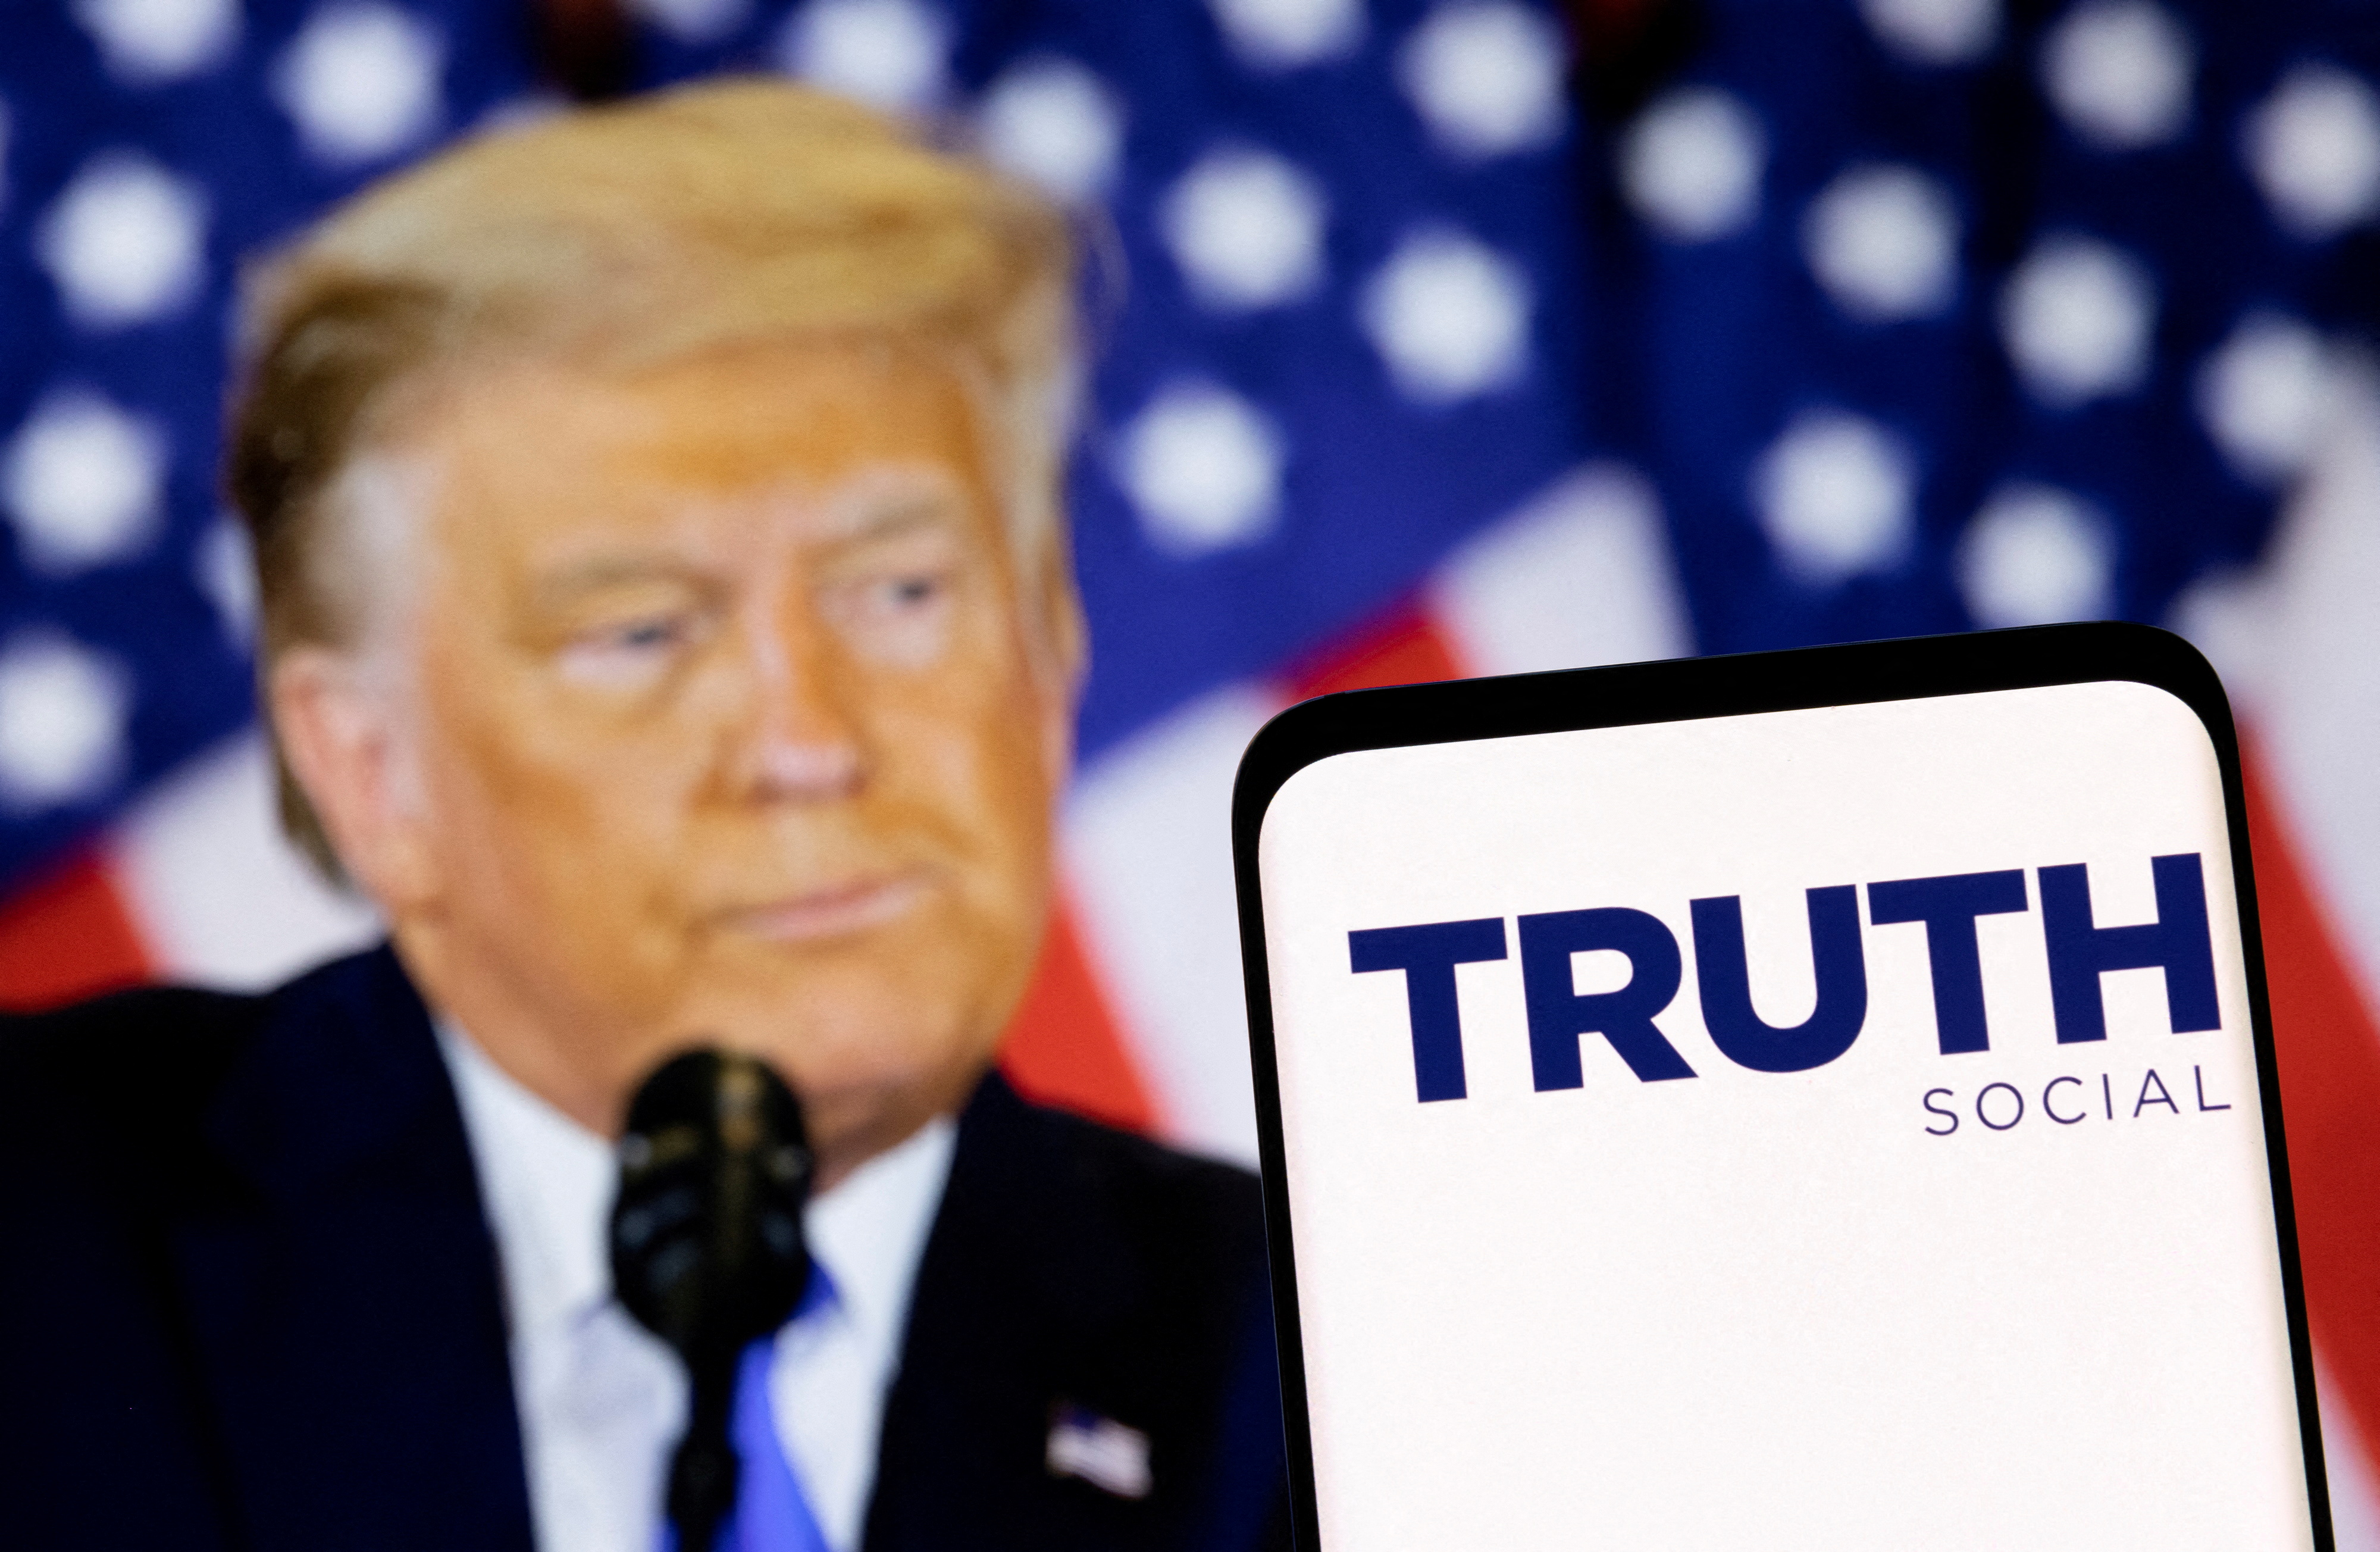 Illustration shows Truth social network logo and display of former U.S. President Donald Trump